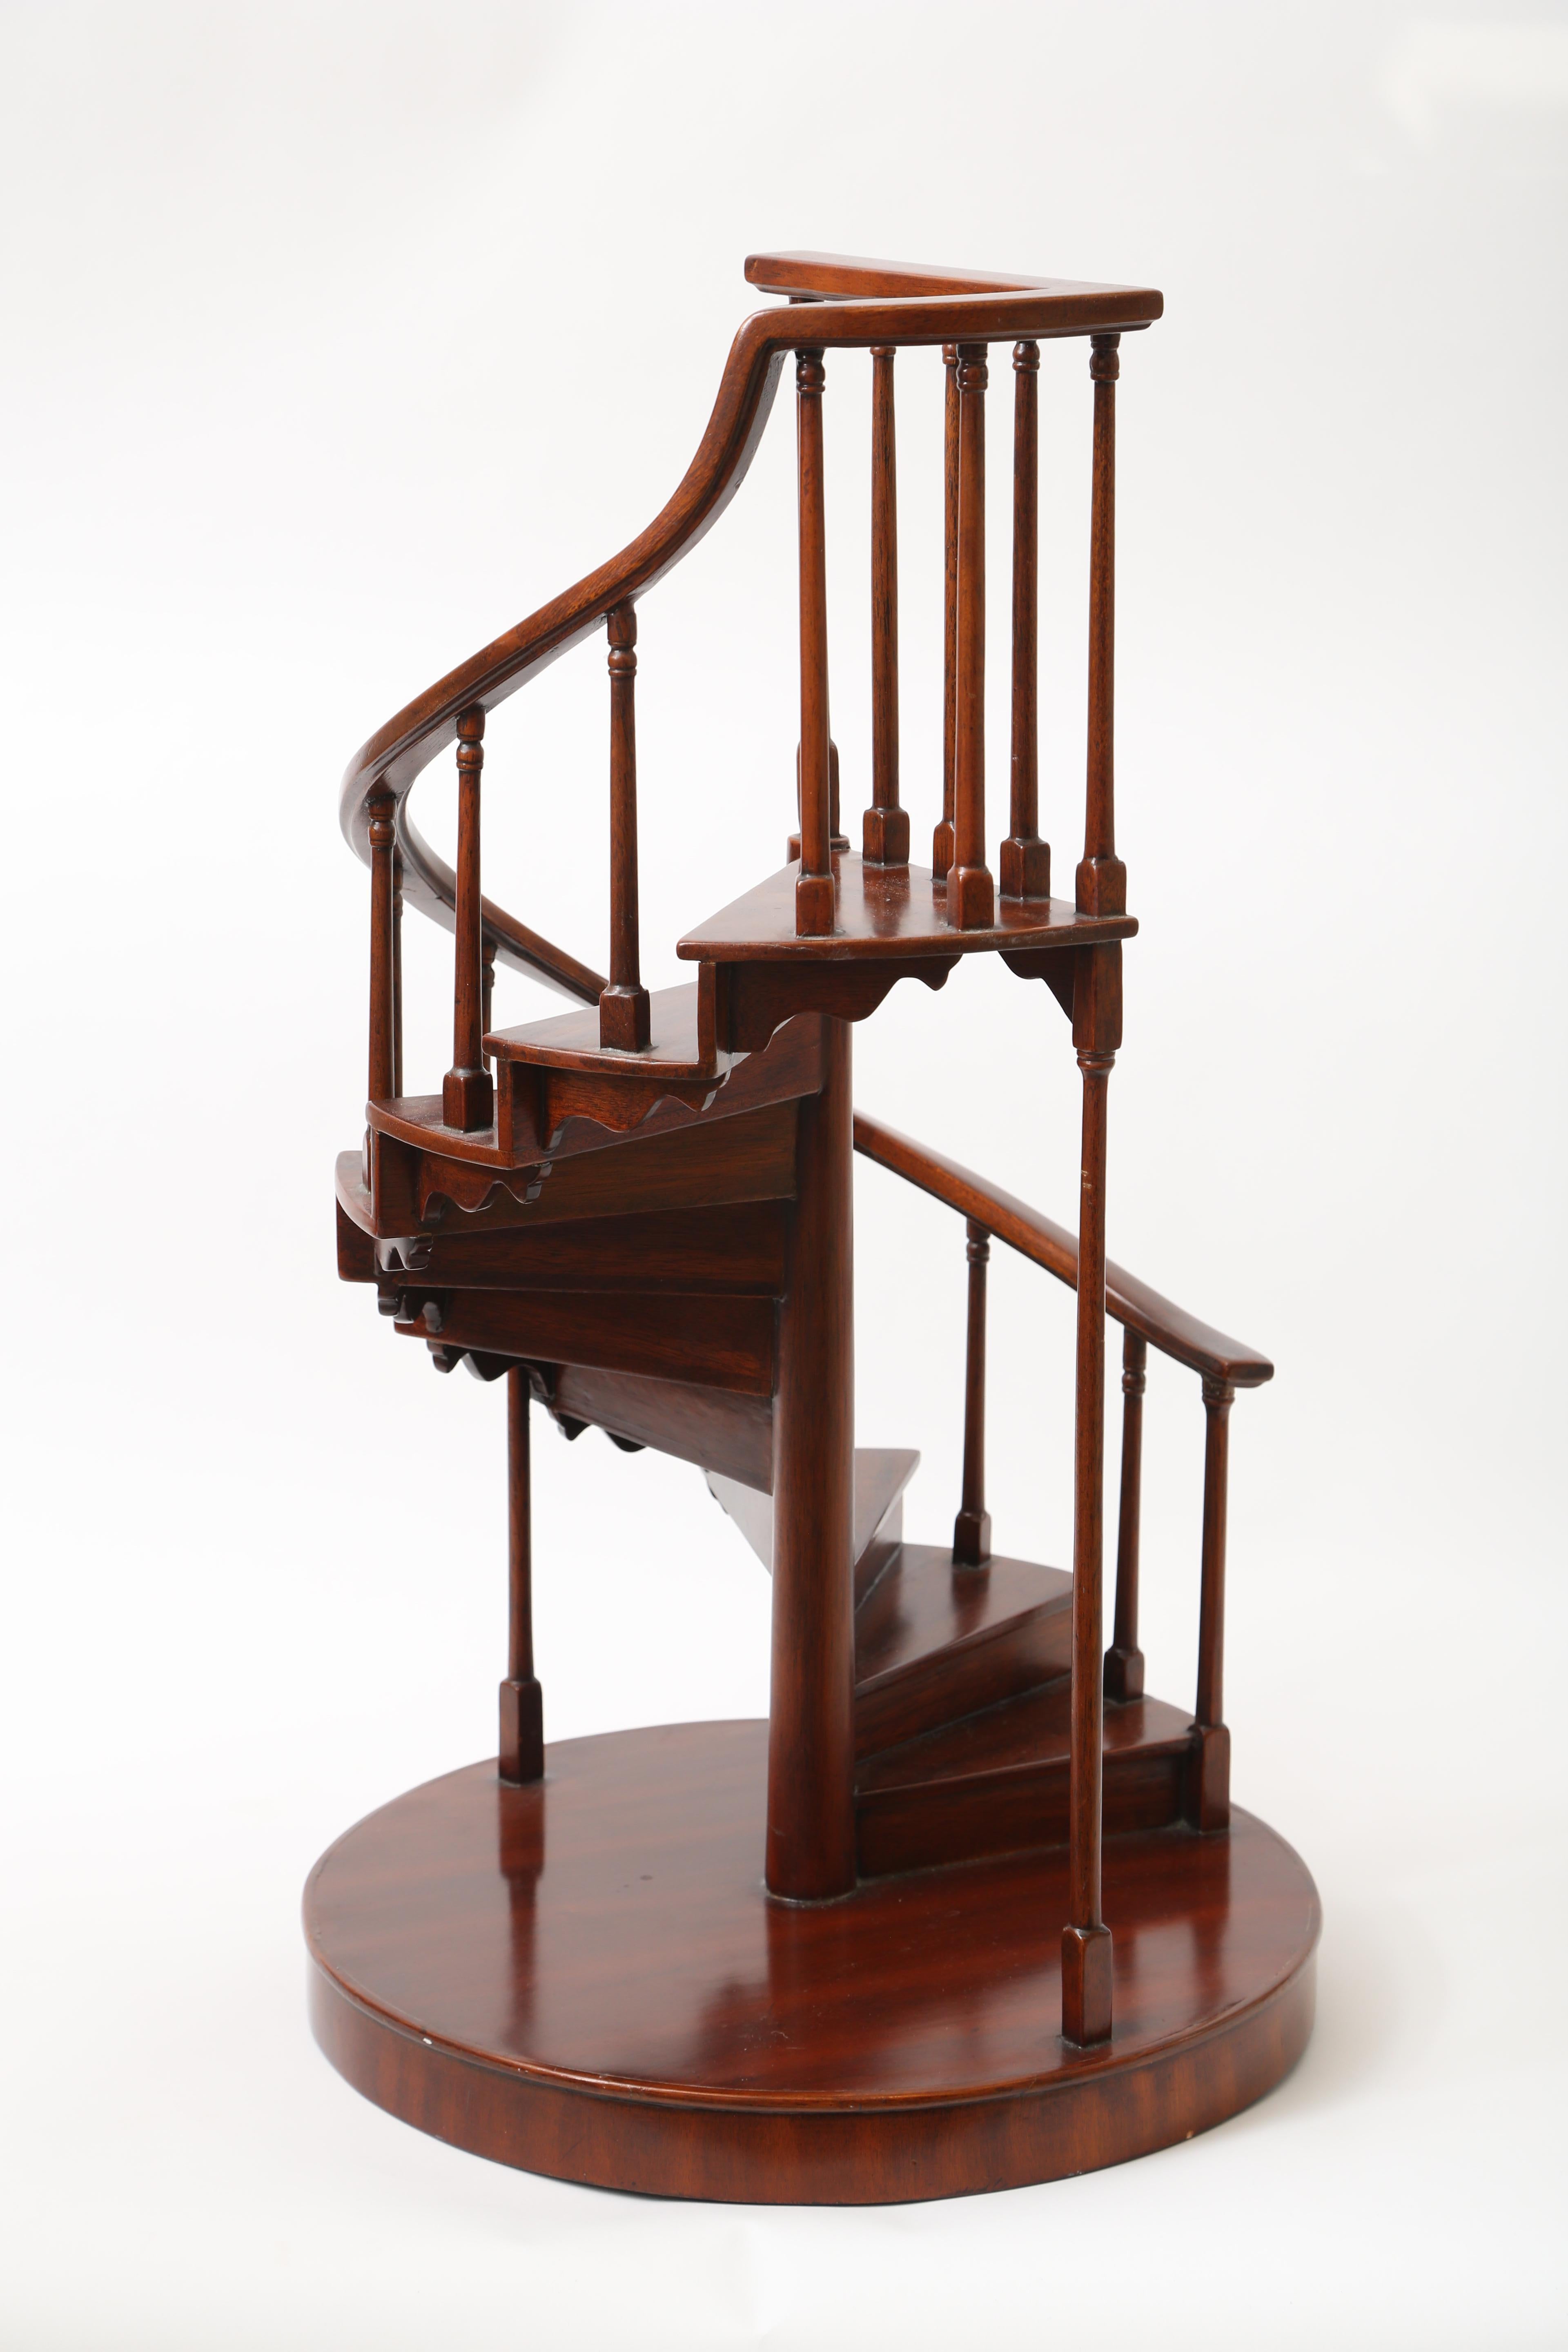 A Classic mahogany spiral staircase design with numerous small steps and turned baluster supports to the elegant curving railing, on a round base. Original sticker for Maitland Smith, an American manufacturer and seller of high quality decorative